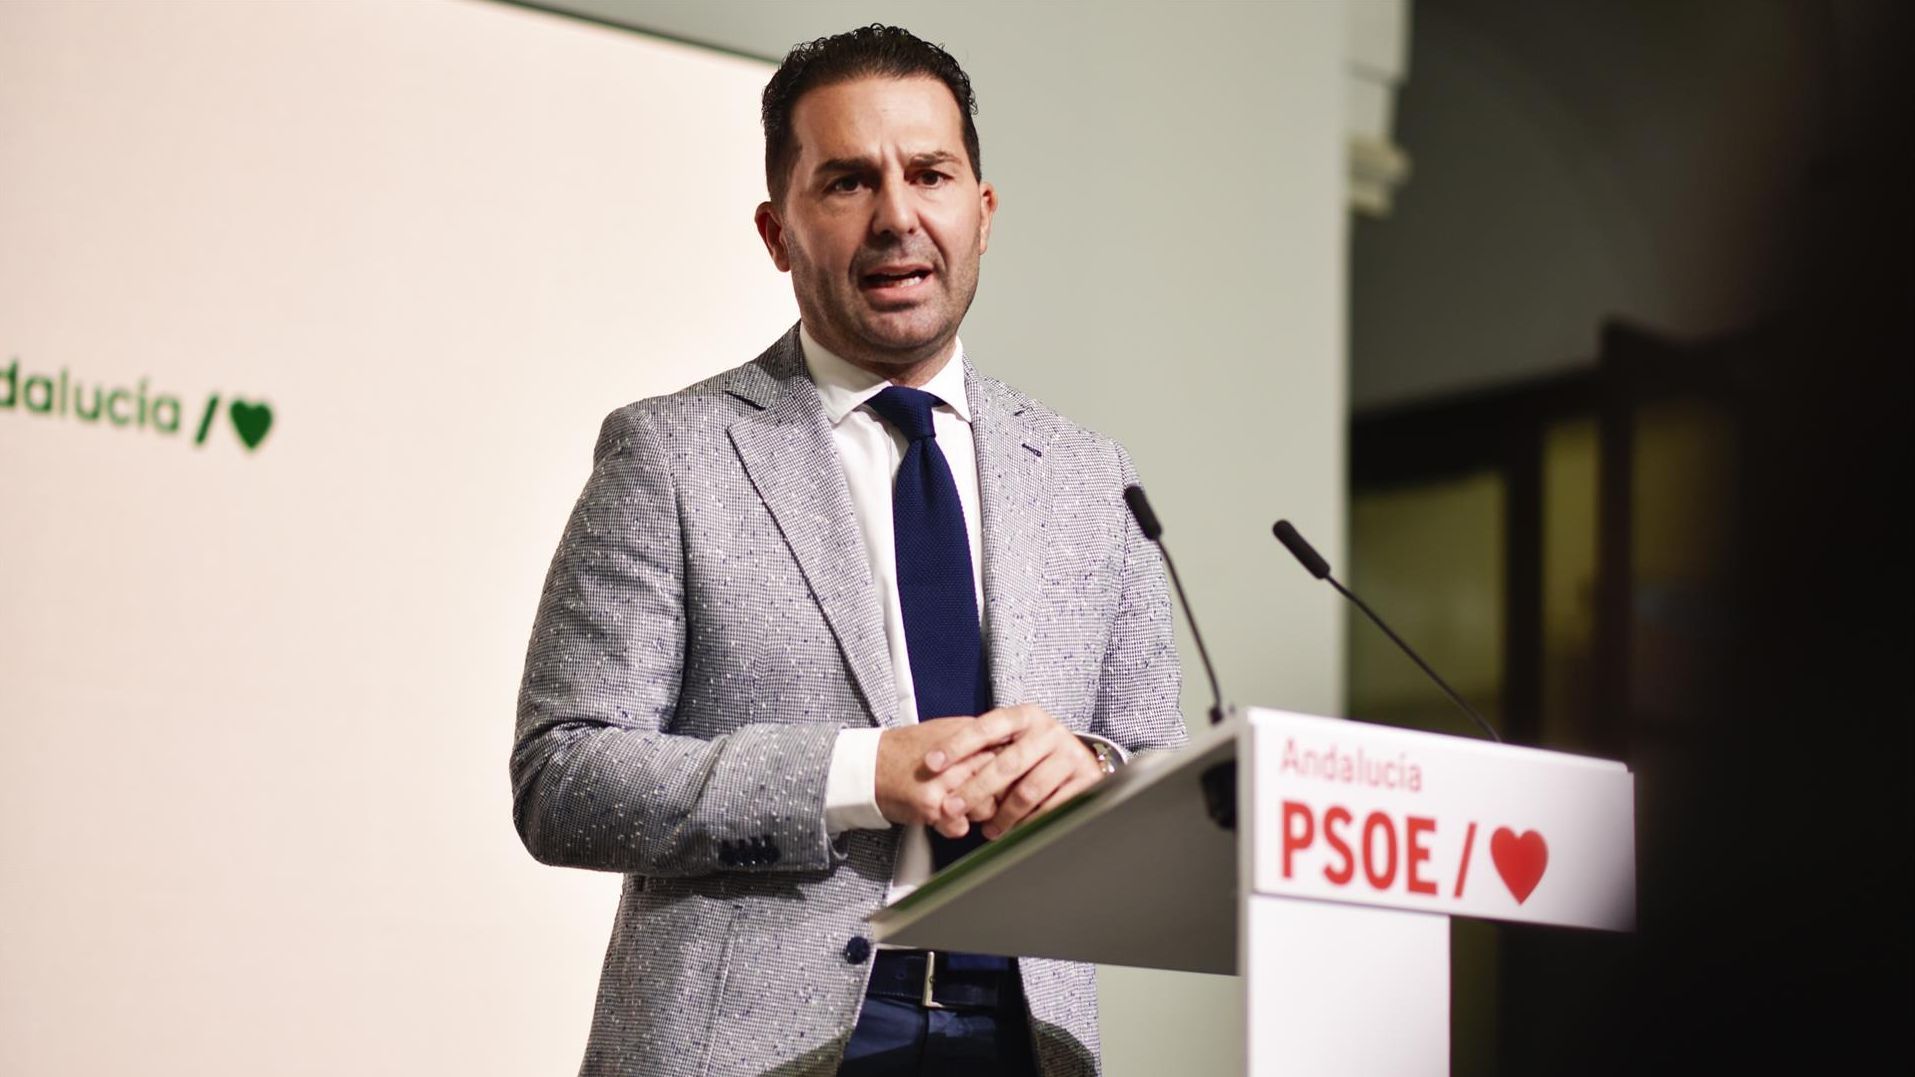 The choose investigating the case of the kidnapping of Maracena asks to analyze Noel López, group secretary of the Andalusian PSOE